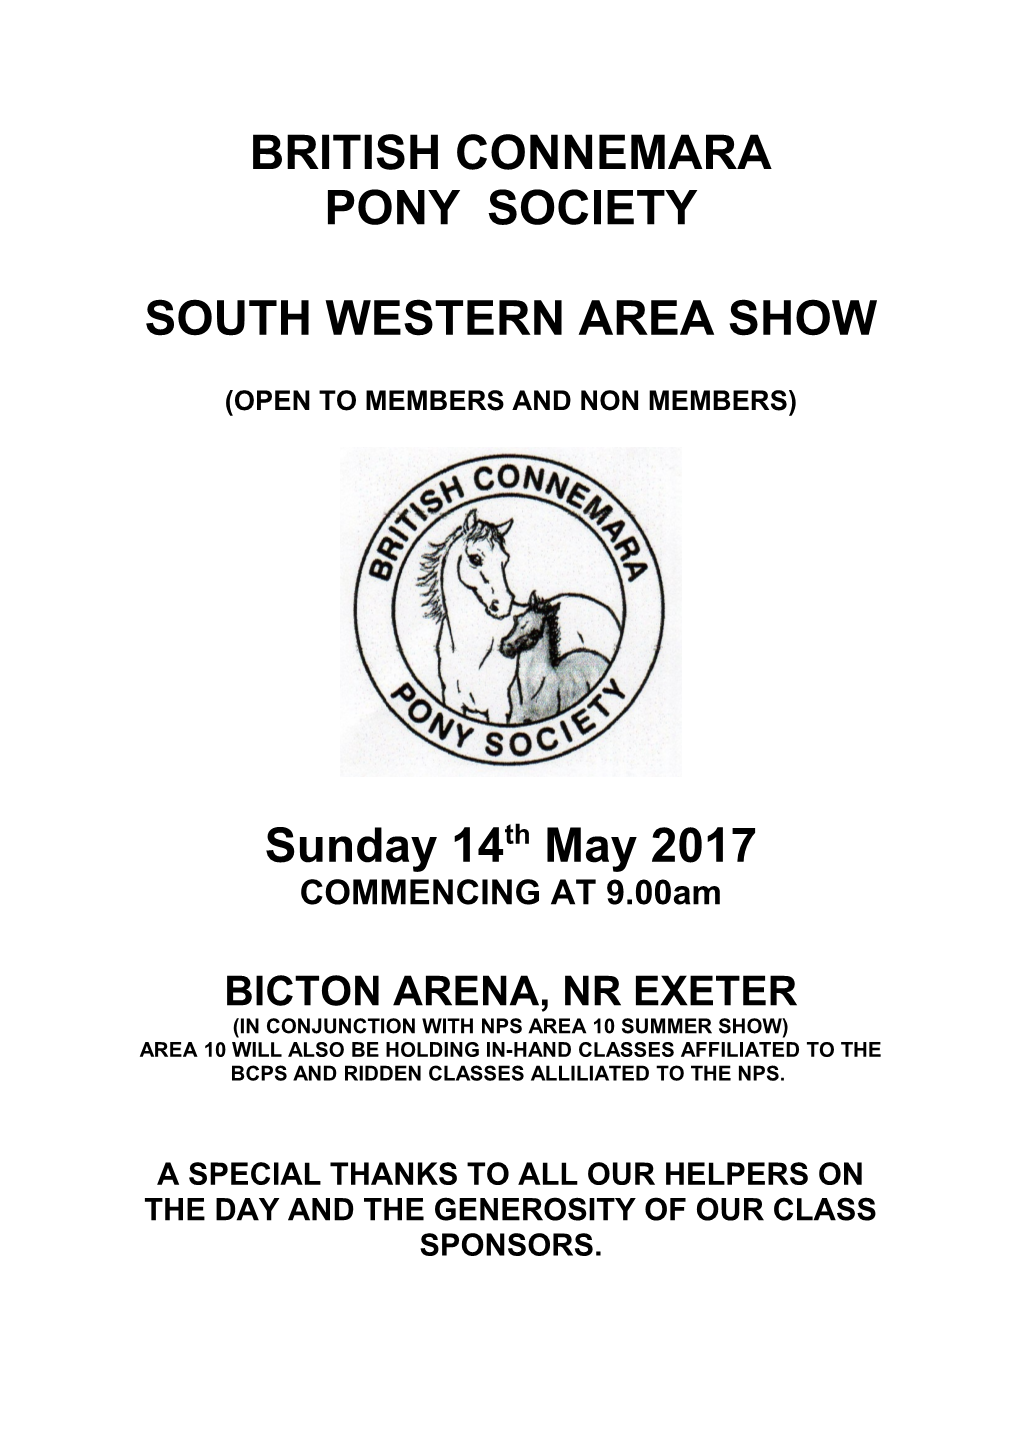 South Western Area Show